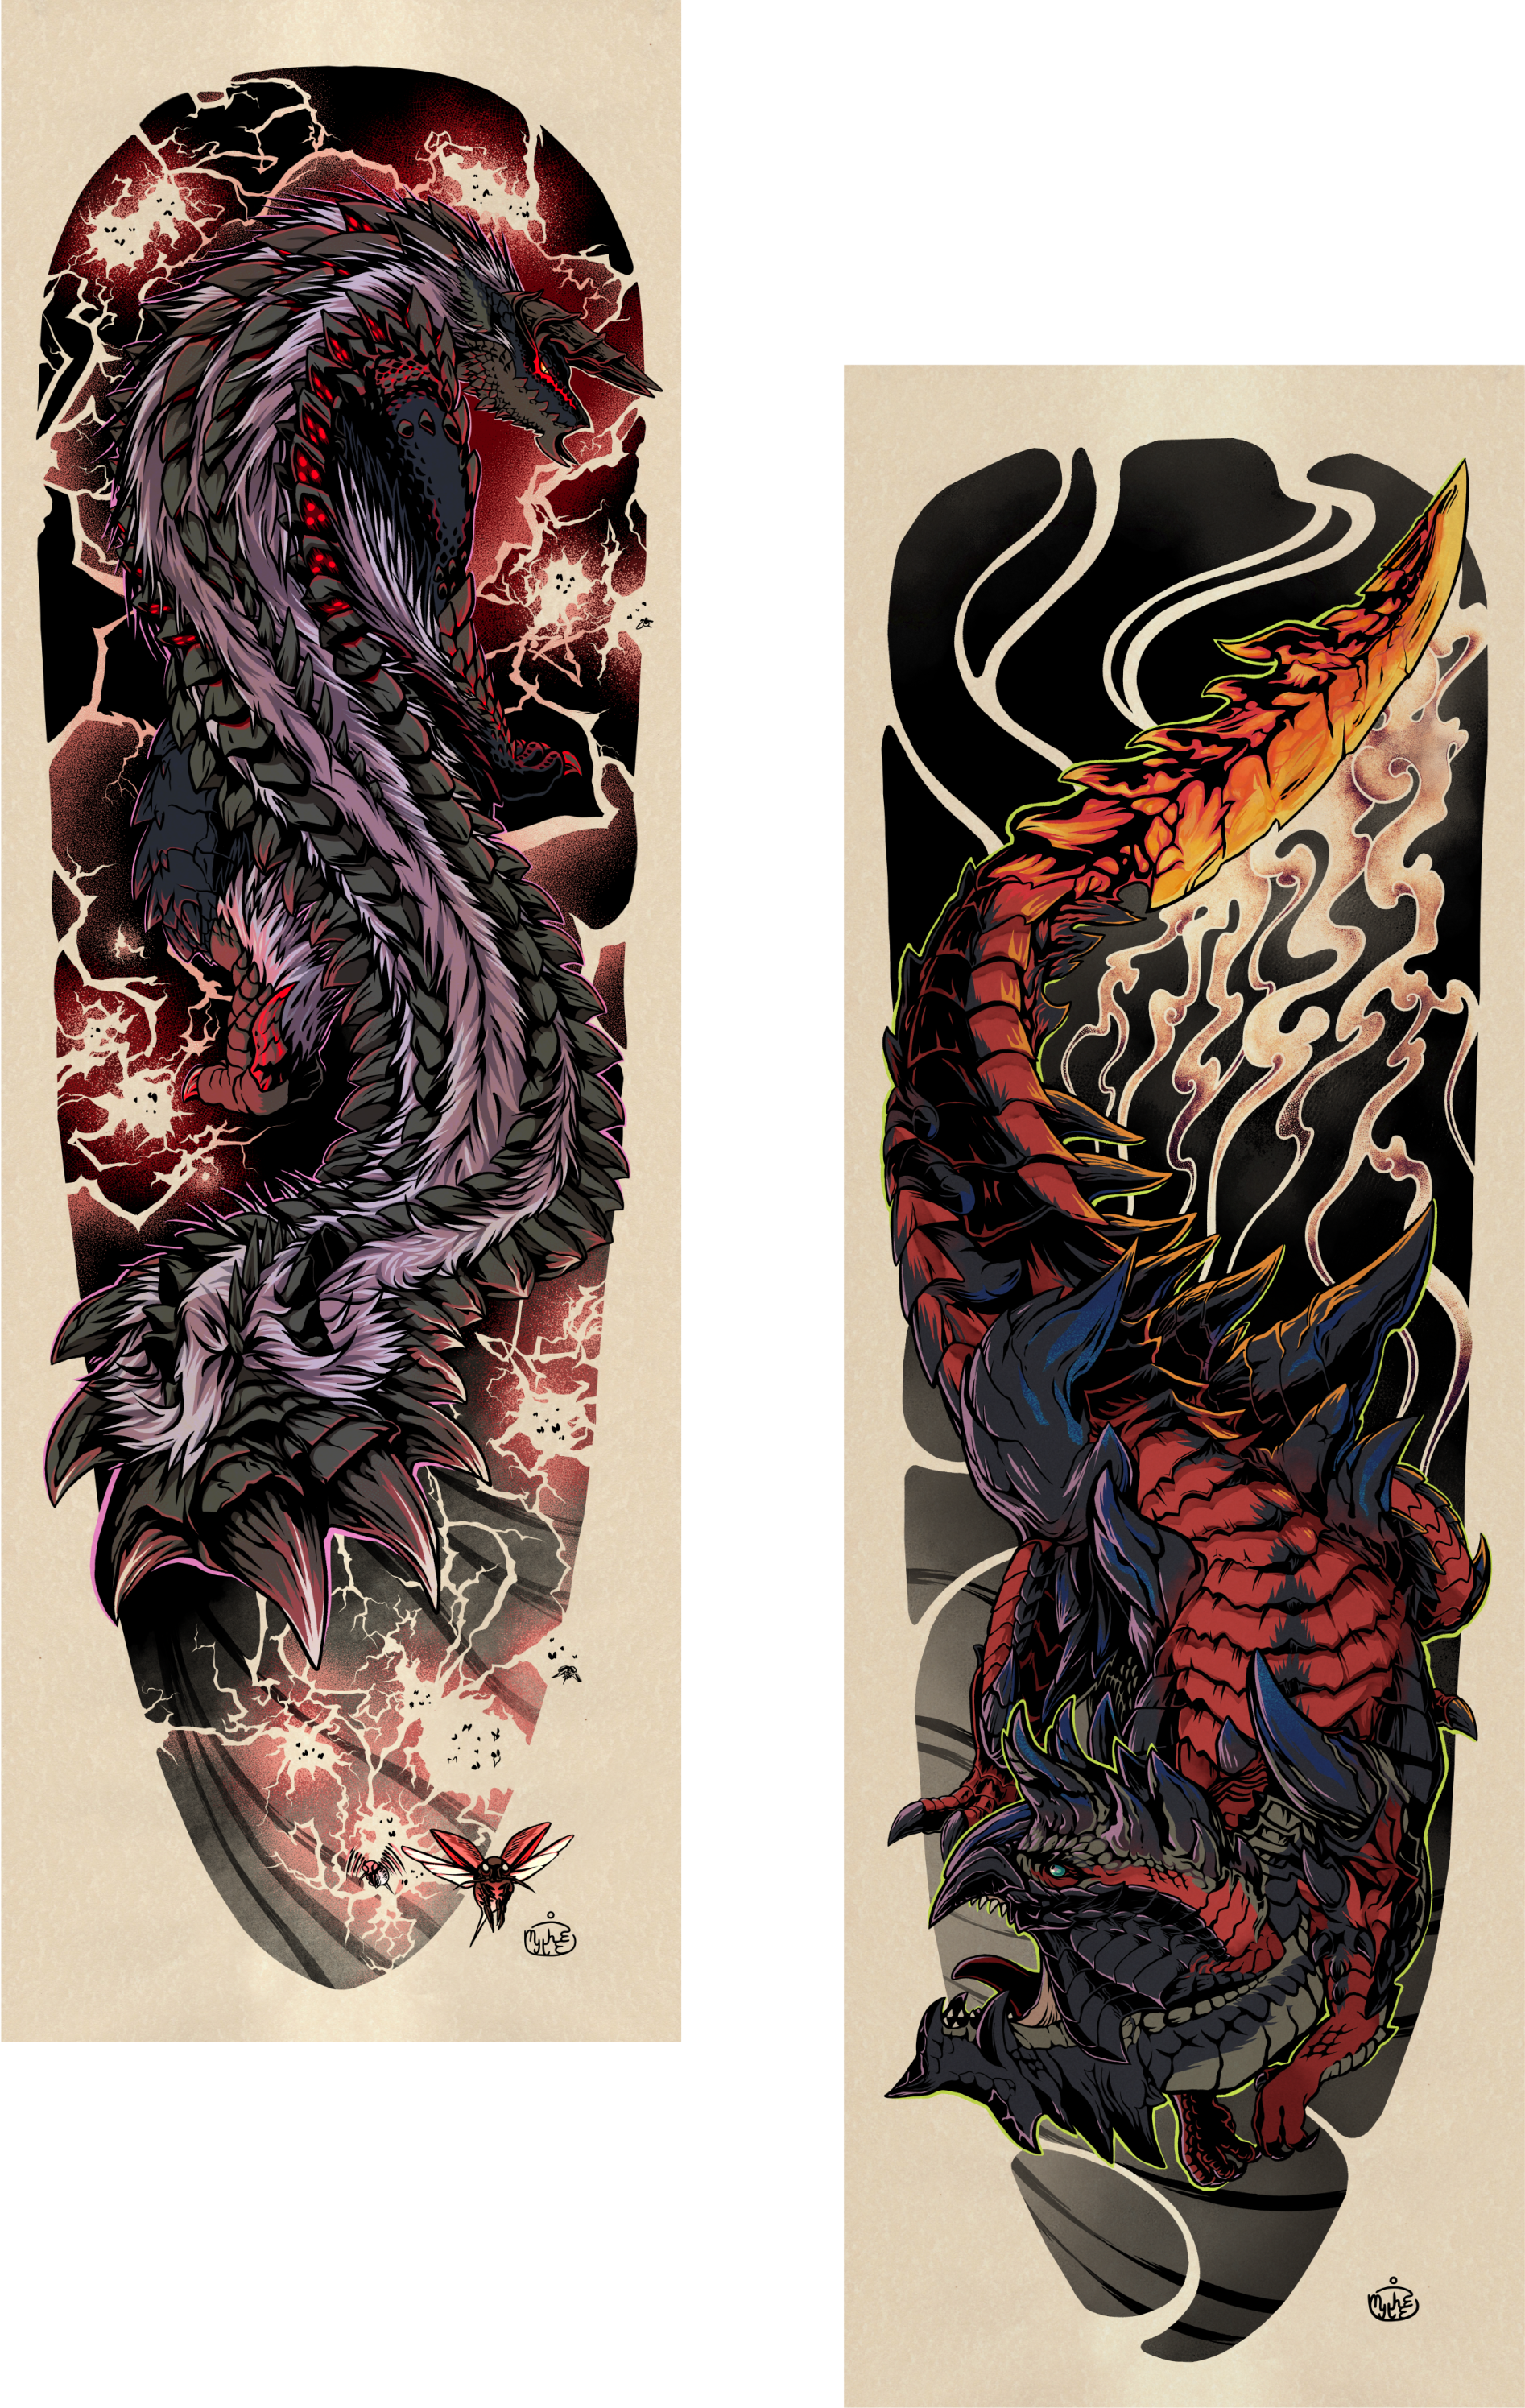 Commissions for two monsters in sleeve tattoo style, from Capcom's Monster Hunter franchise.